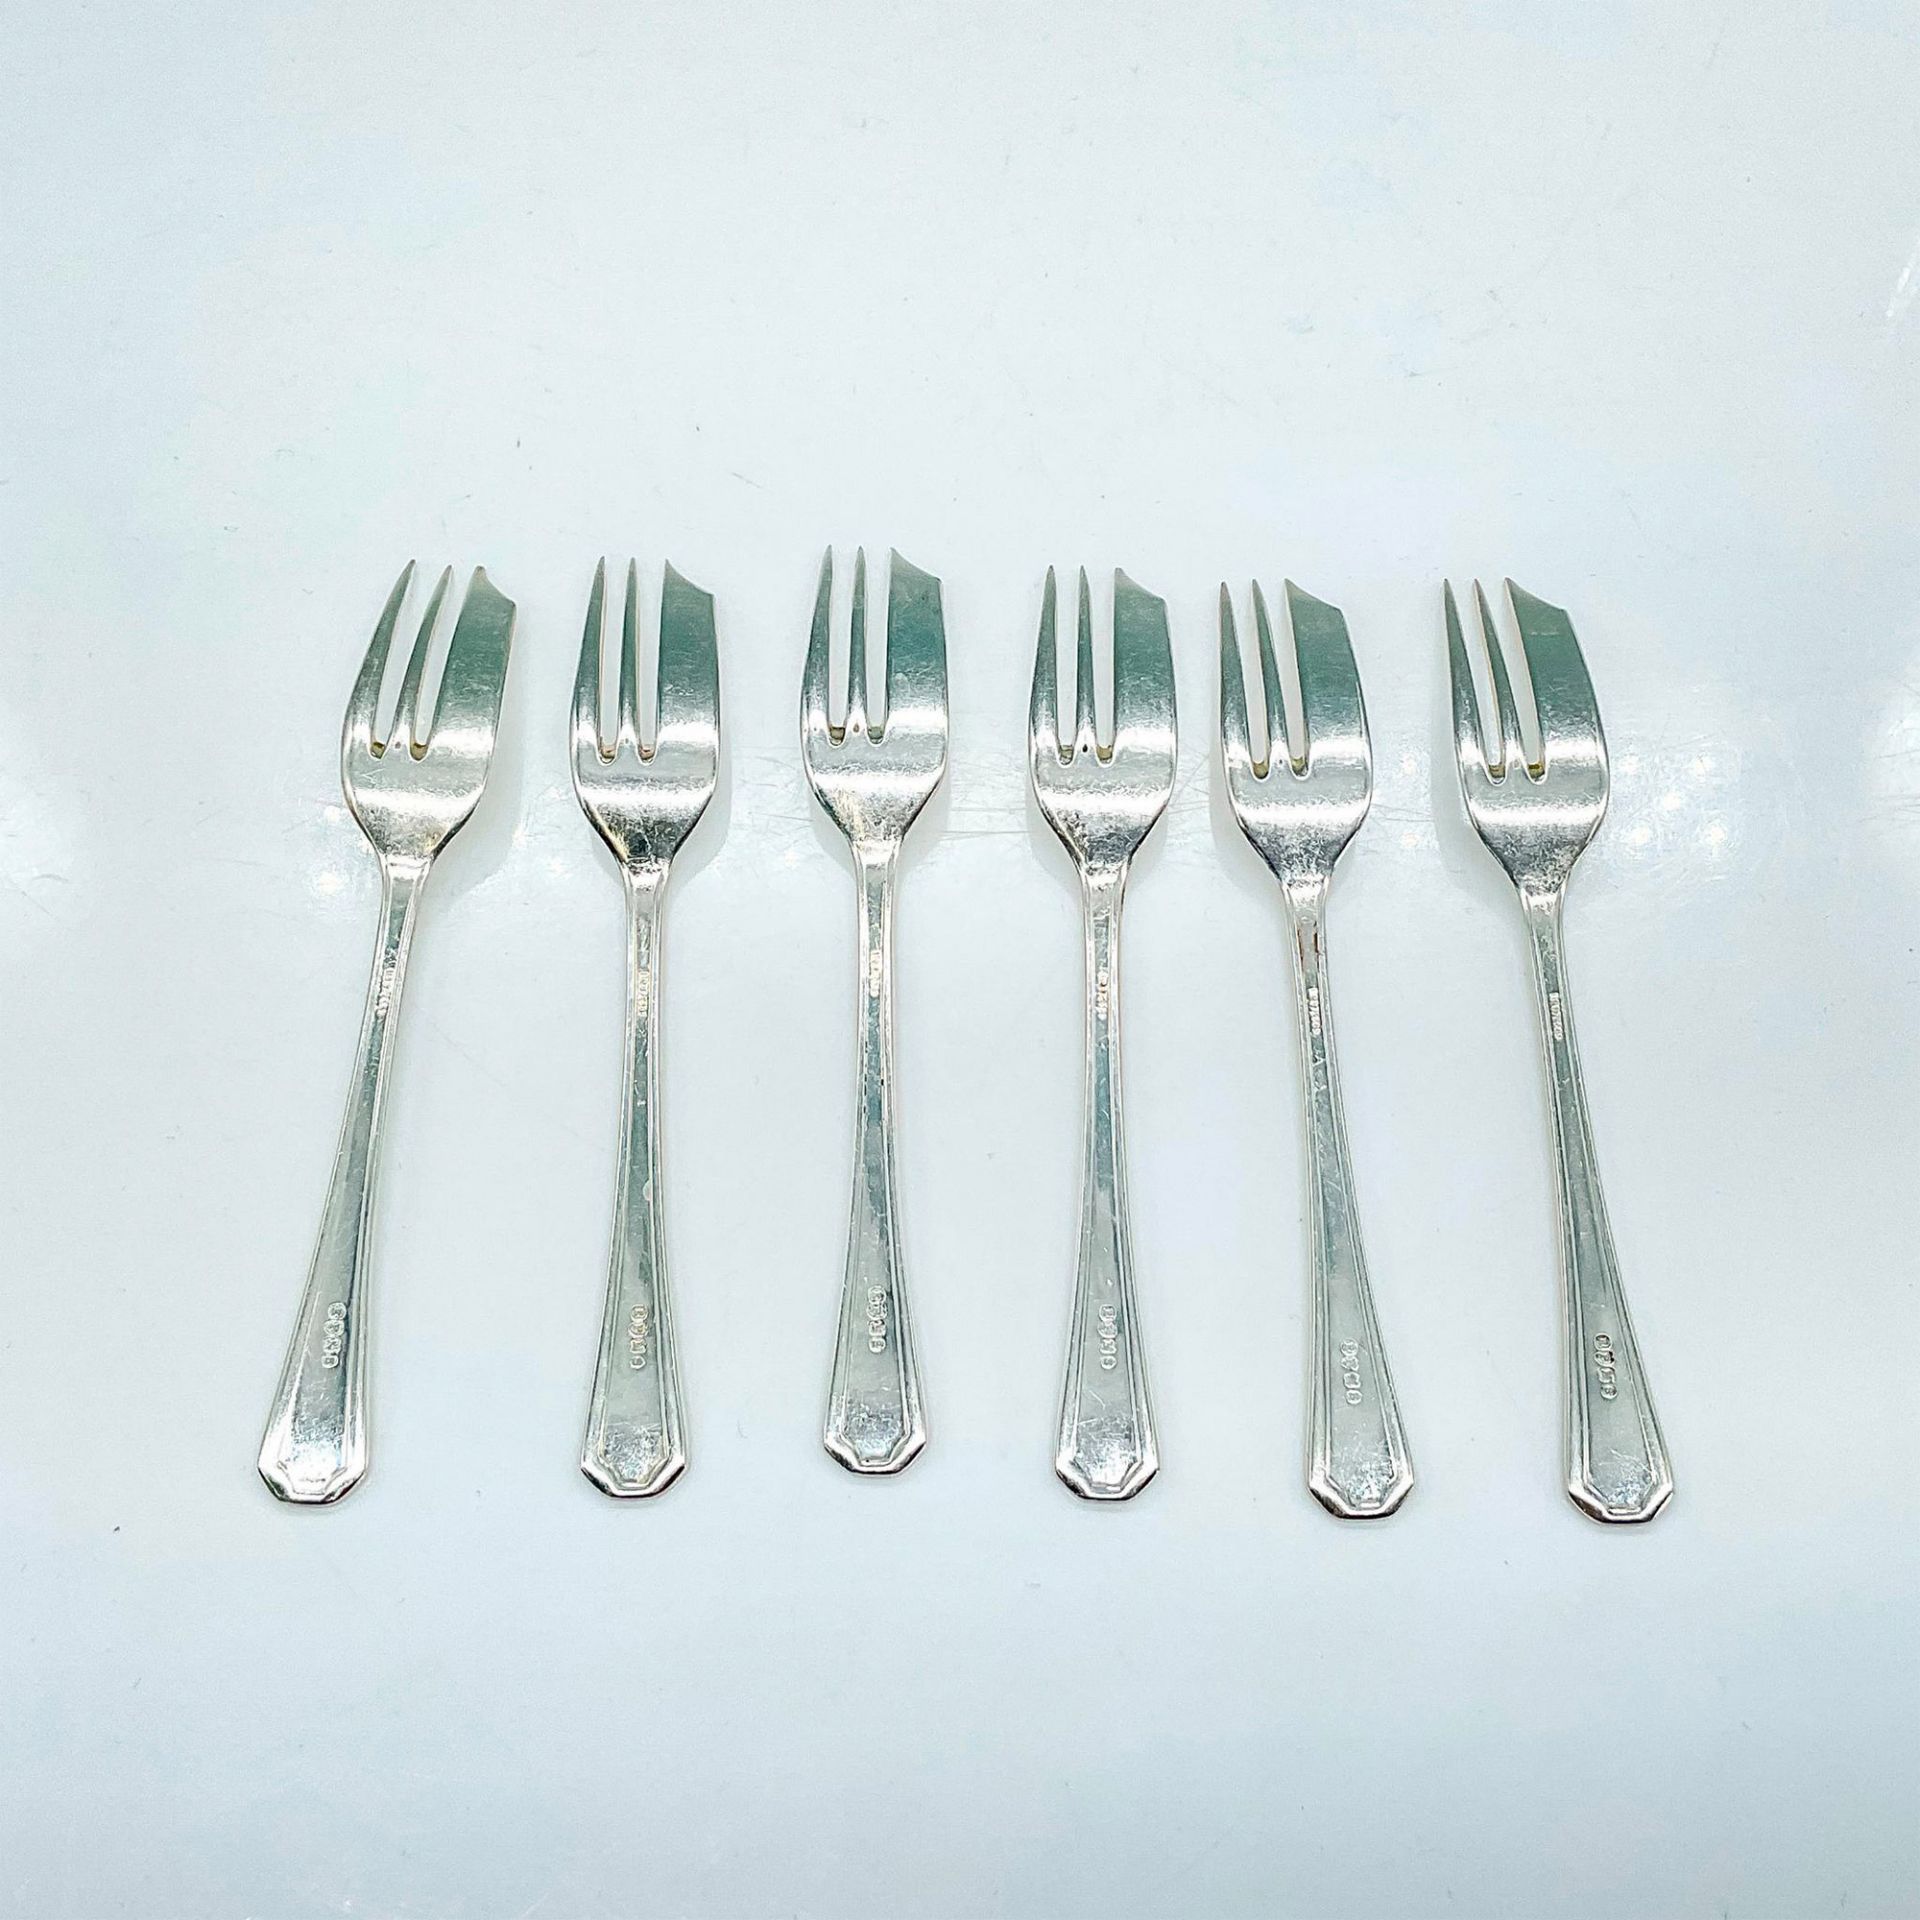 6pc Silver Plated Dessert Forks - Image 2 of 3